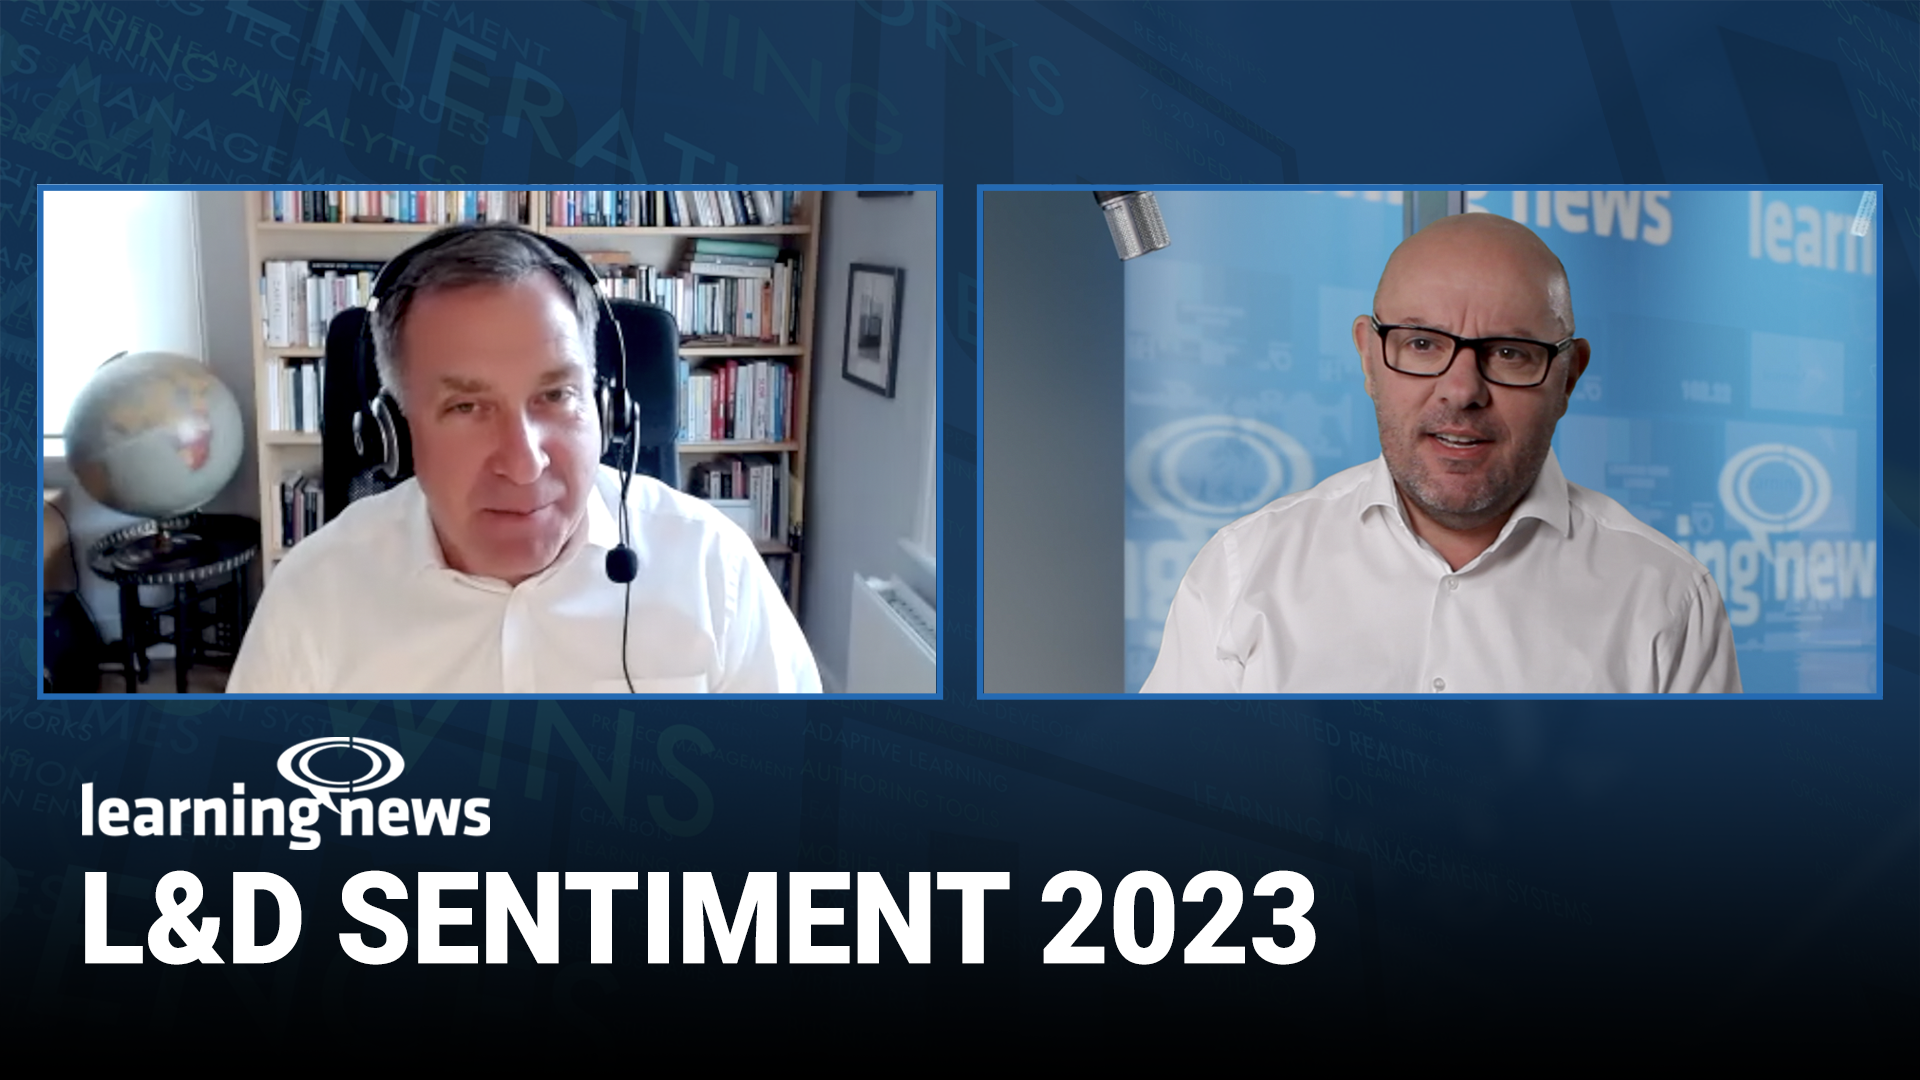 Donald H Taylor discusses sentiment in L&D with Rob Clarke